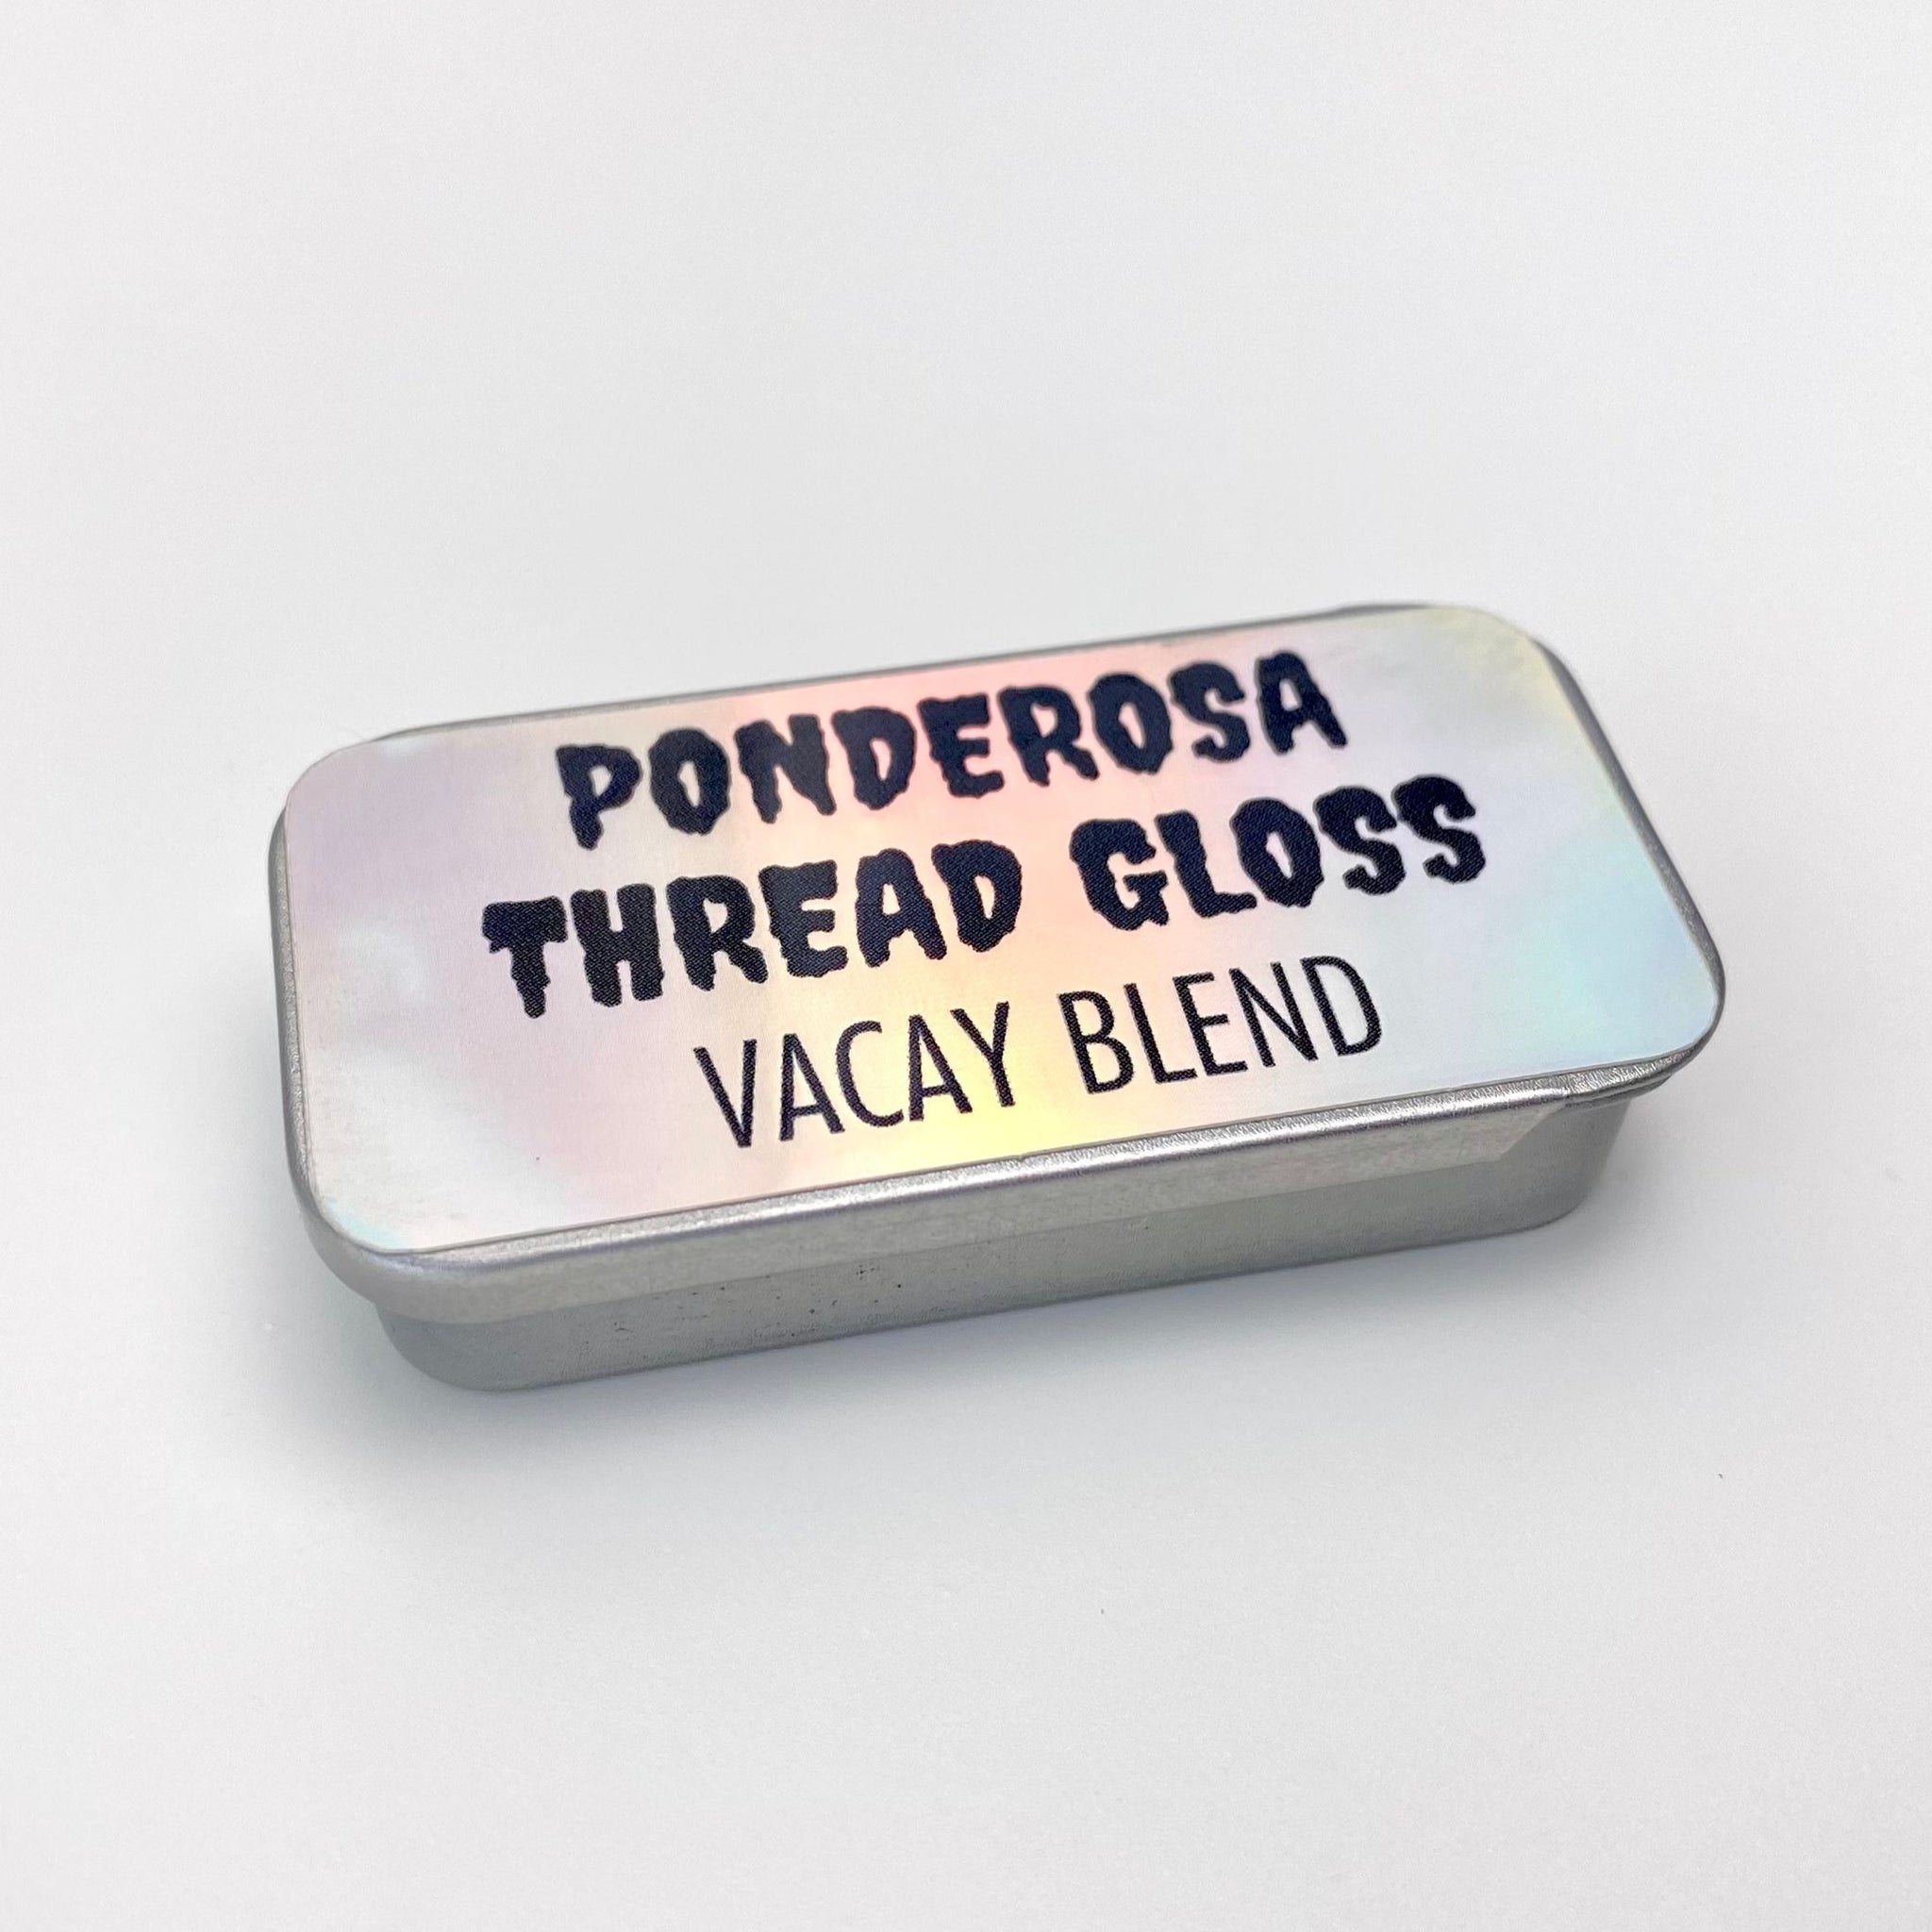 Ponderosa Creative-Vacay Blend Thread Gloss-sewing notion-gather here online